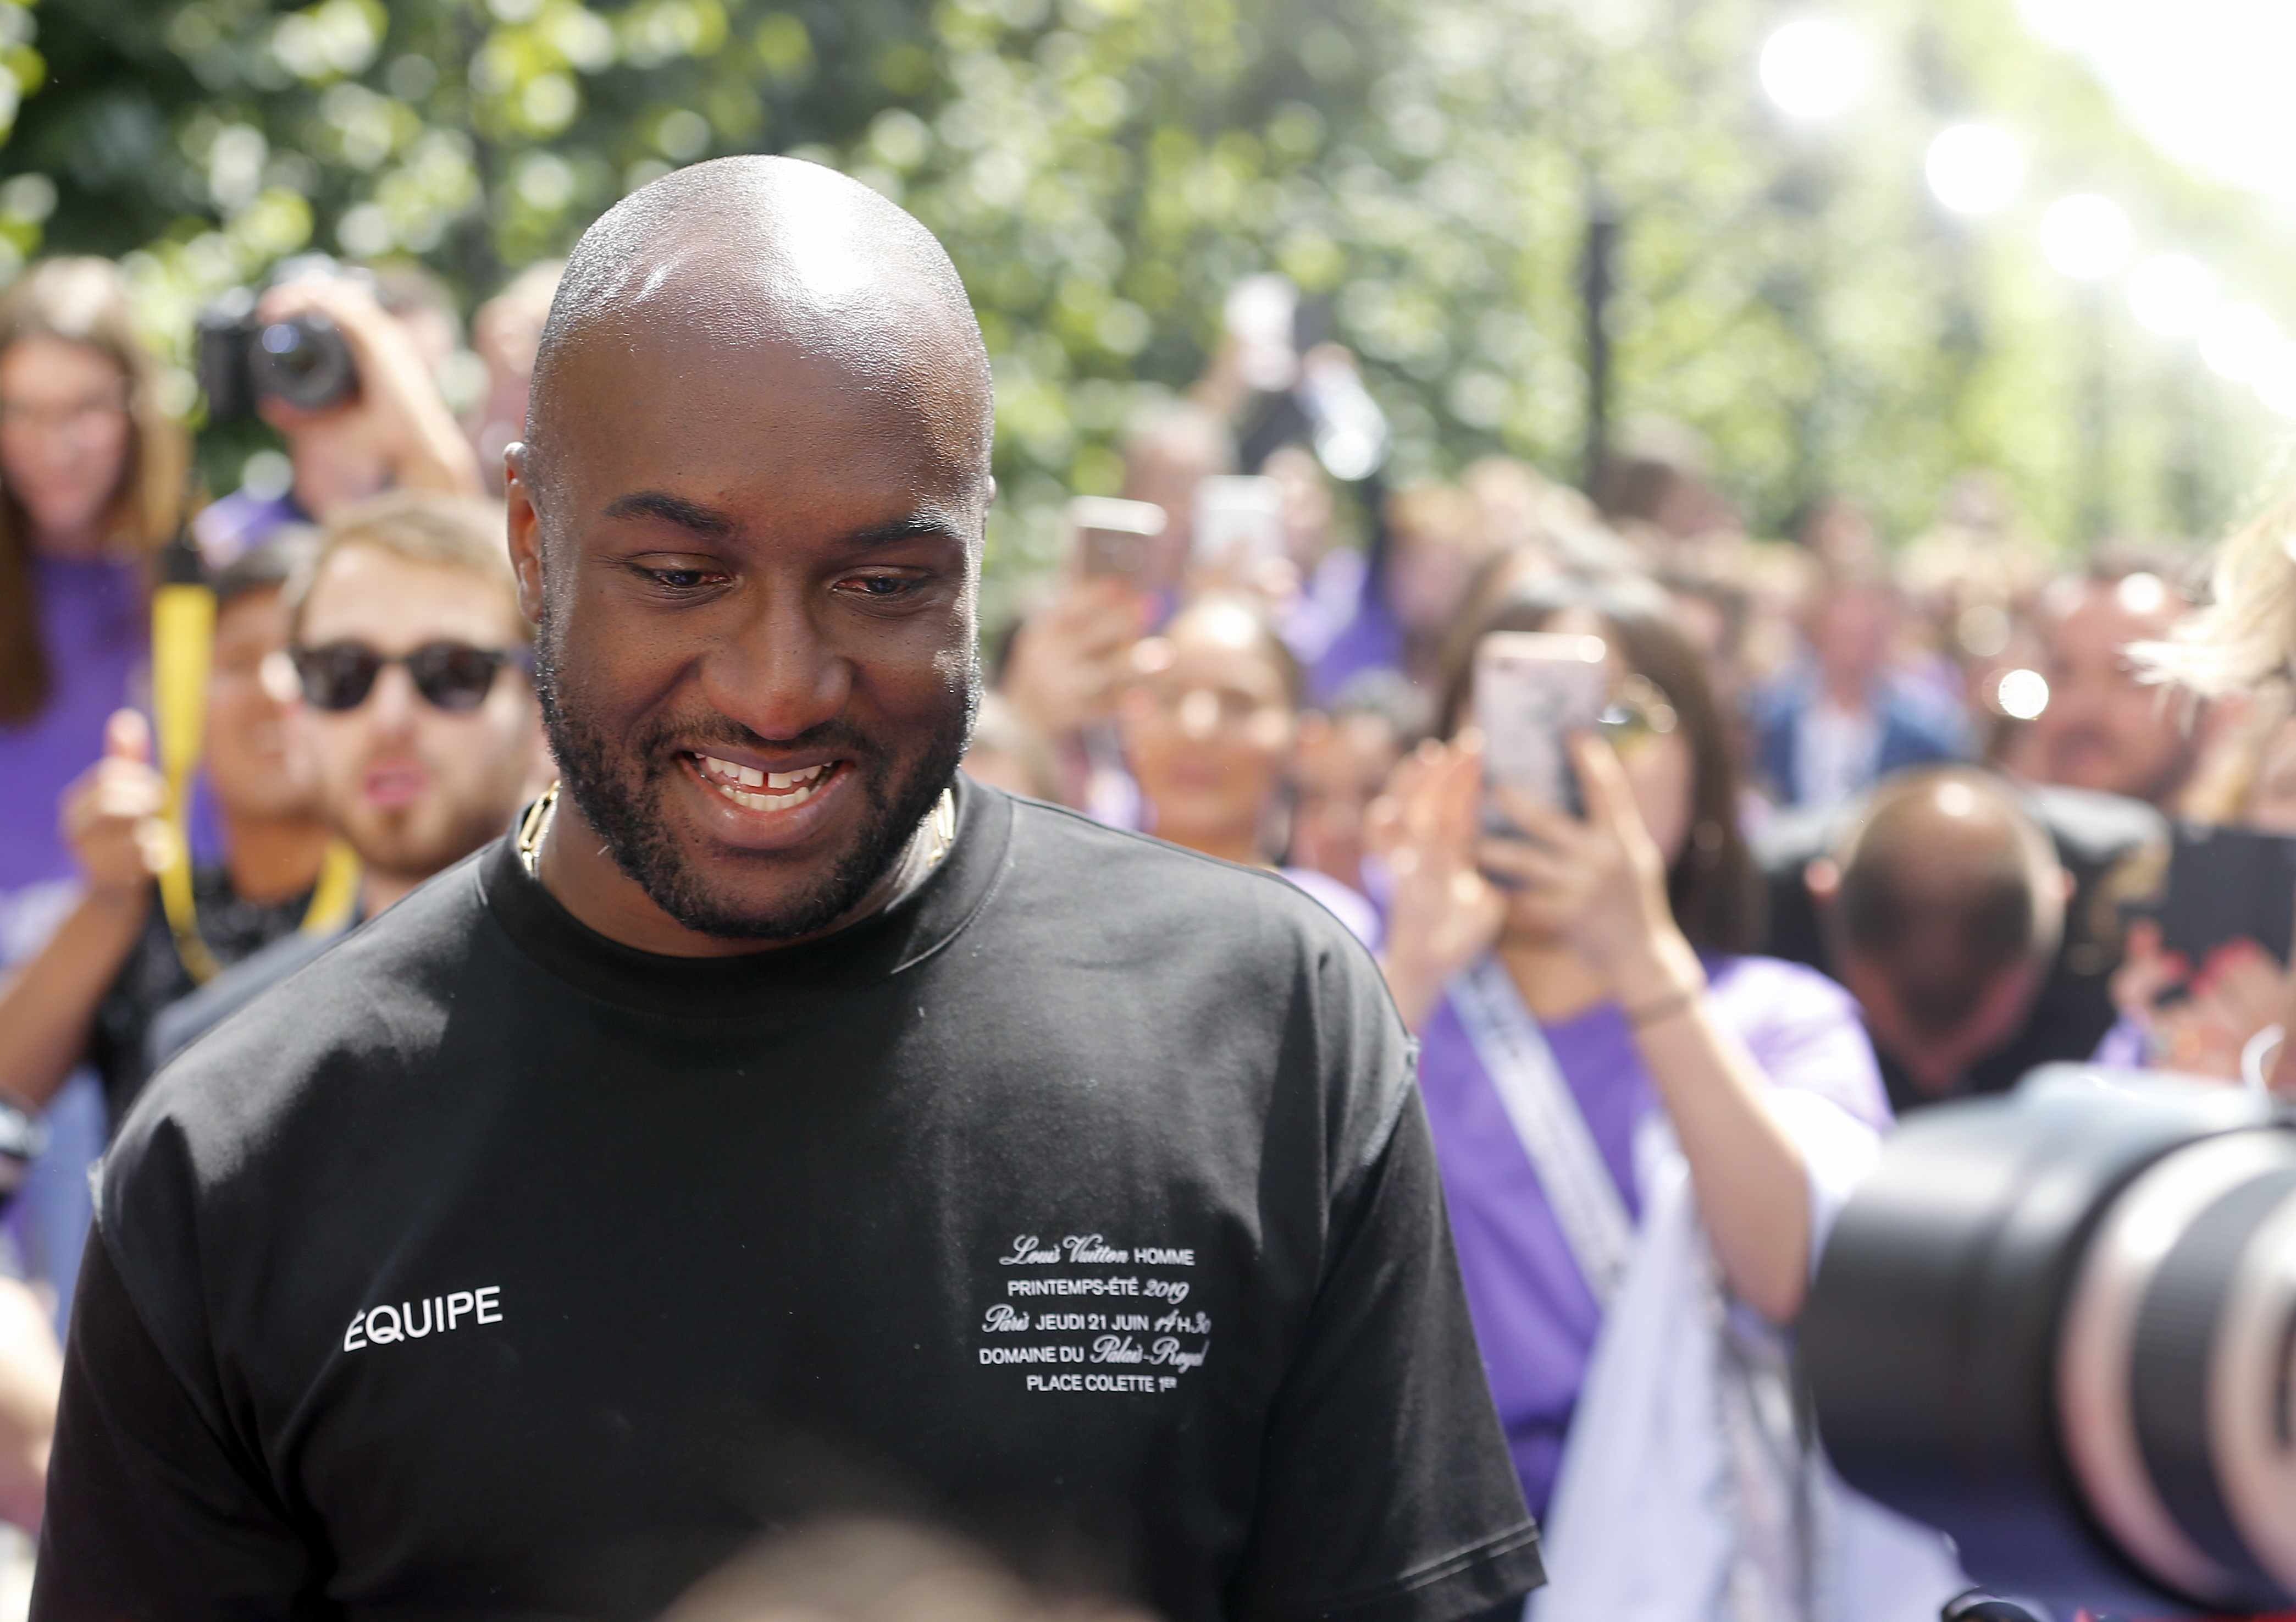 R.I.P: Virgil Abloh Dead At 41 Following Private Battle With Cancer